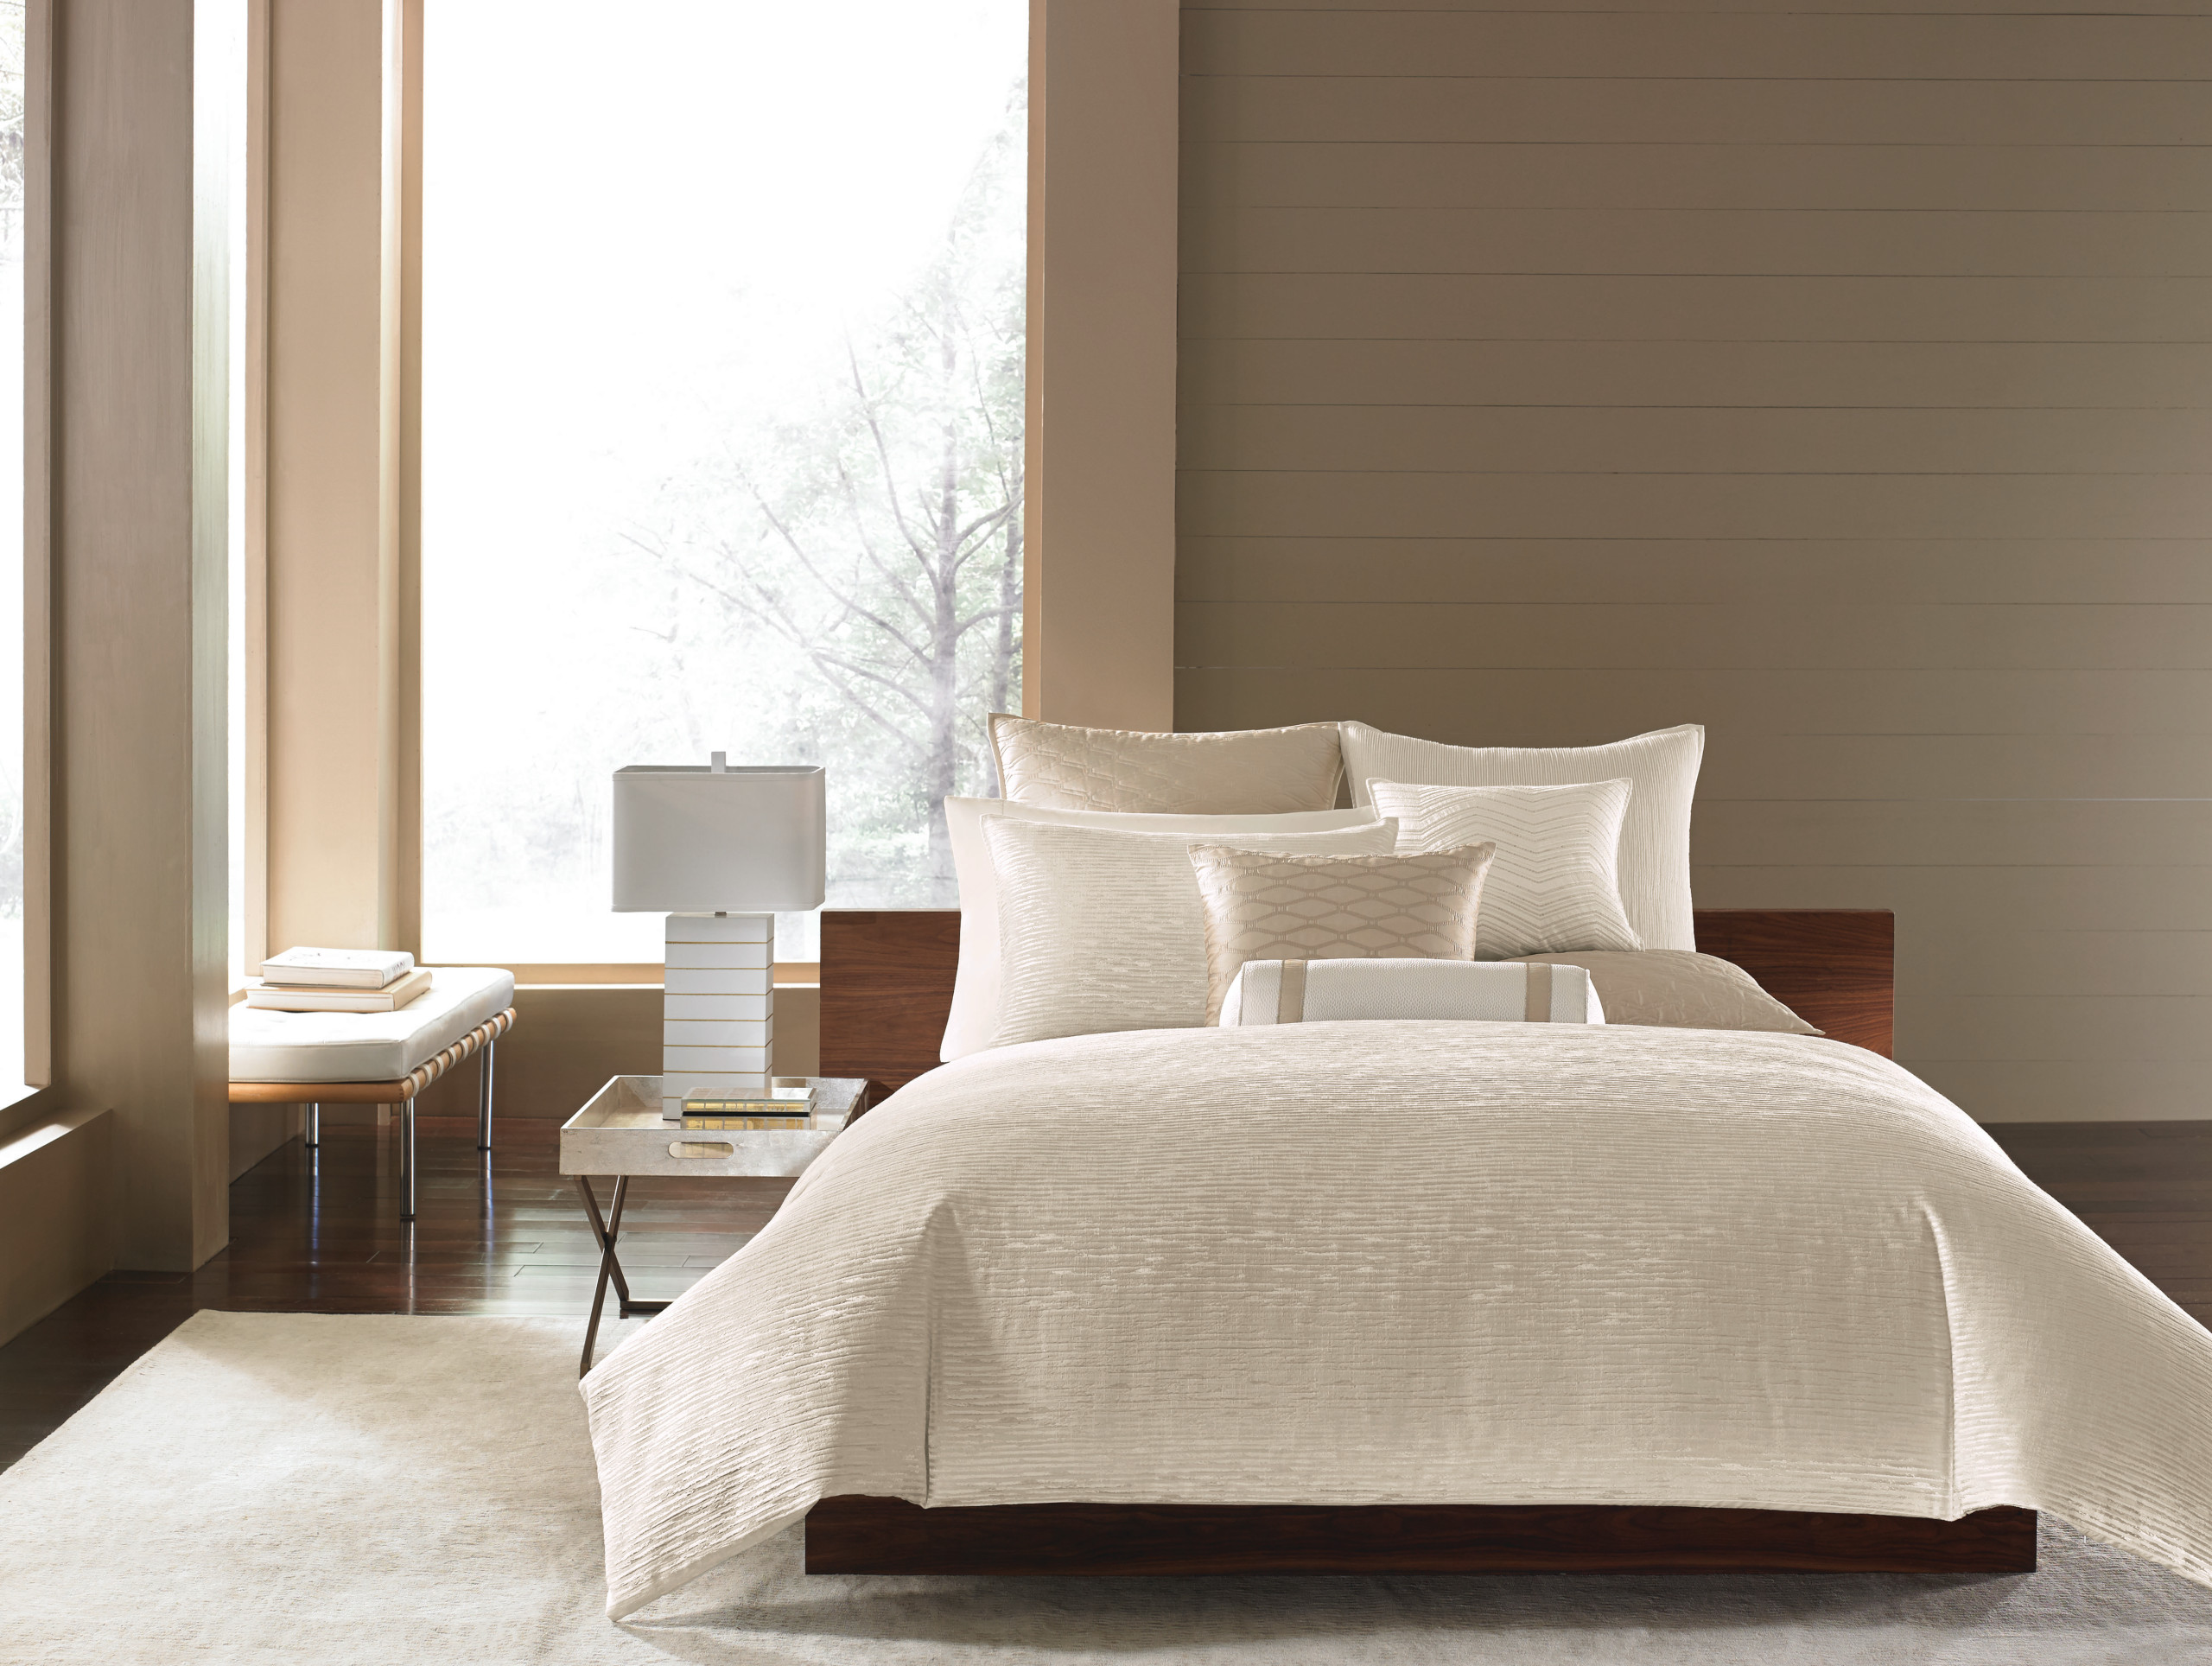 Hotel Collection Woven Texture Bedding, Hotel Collection Woven Texture Full Queen Duvet Cover